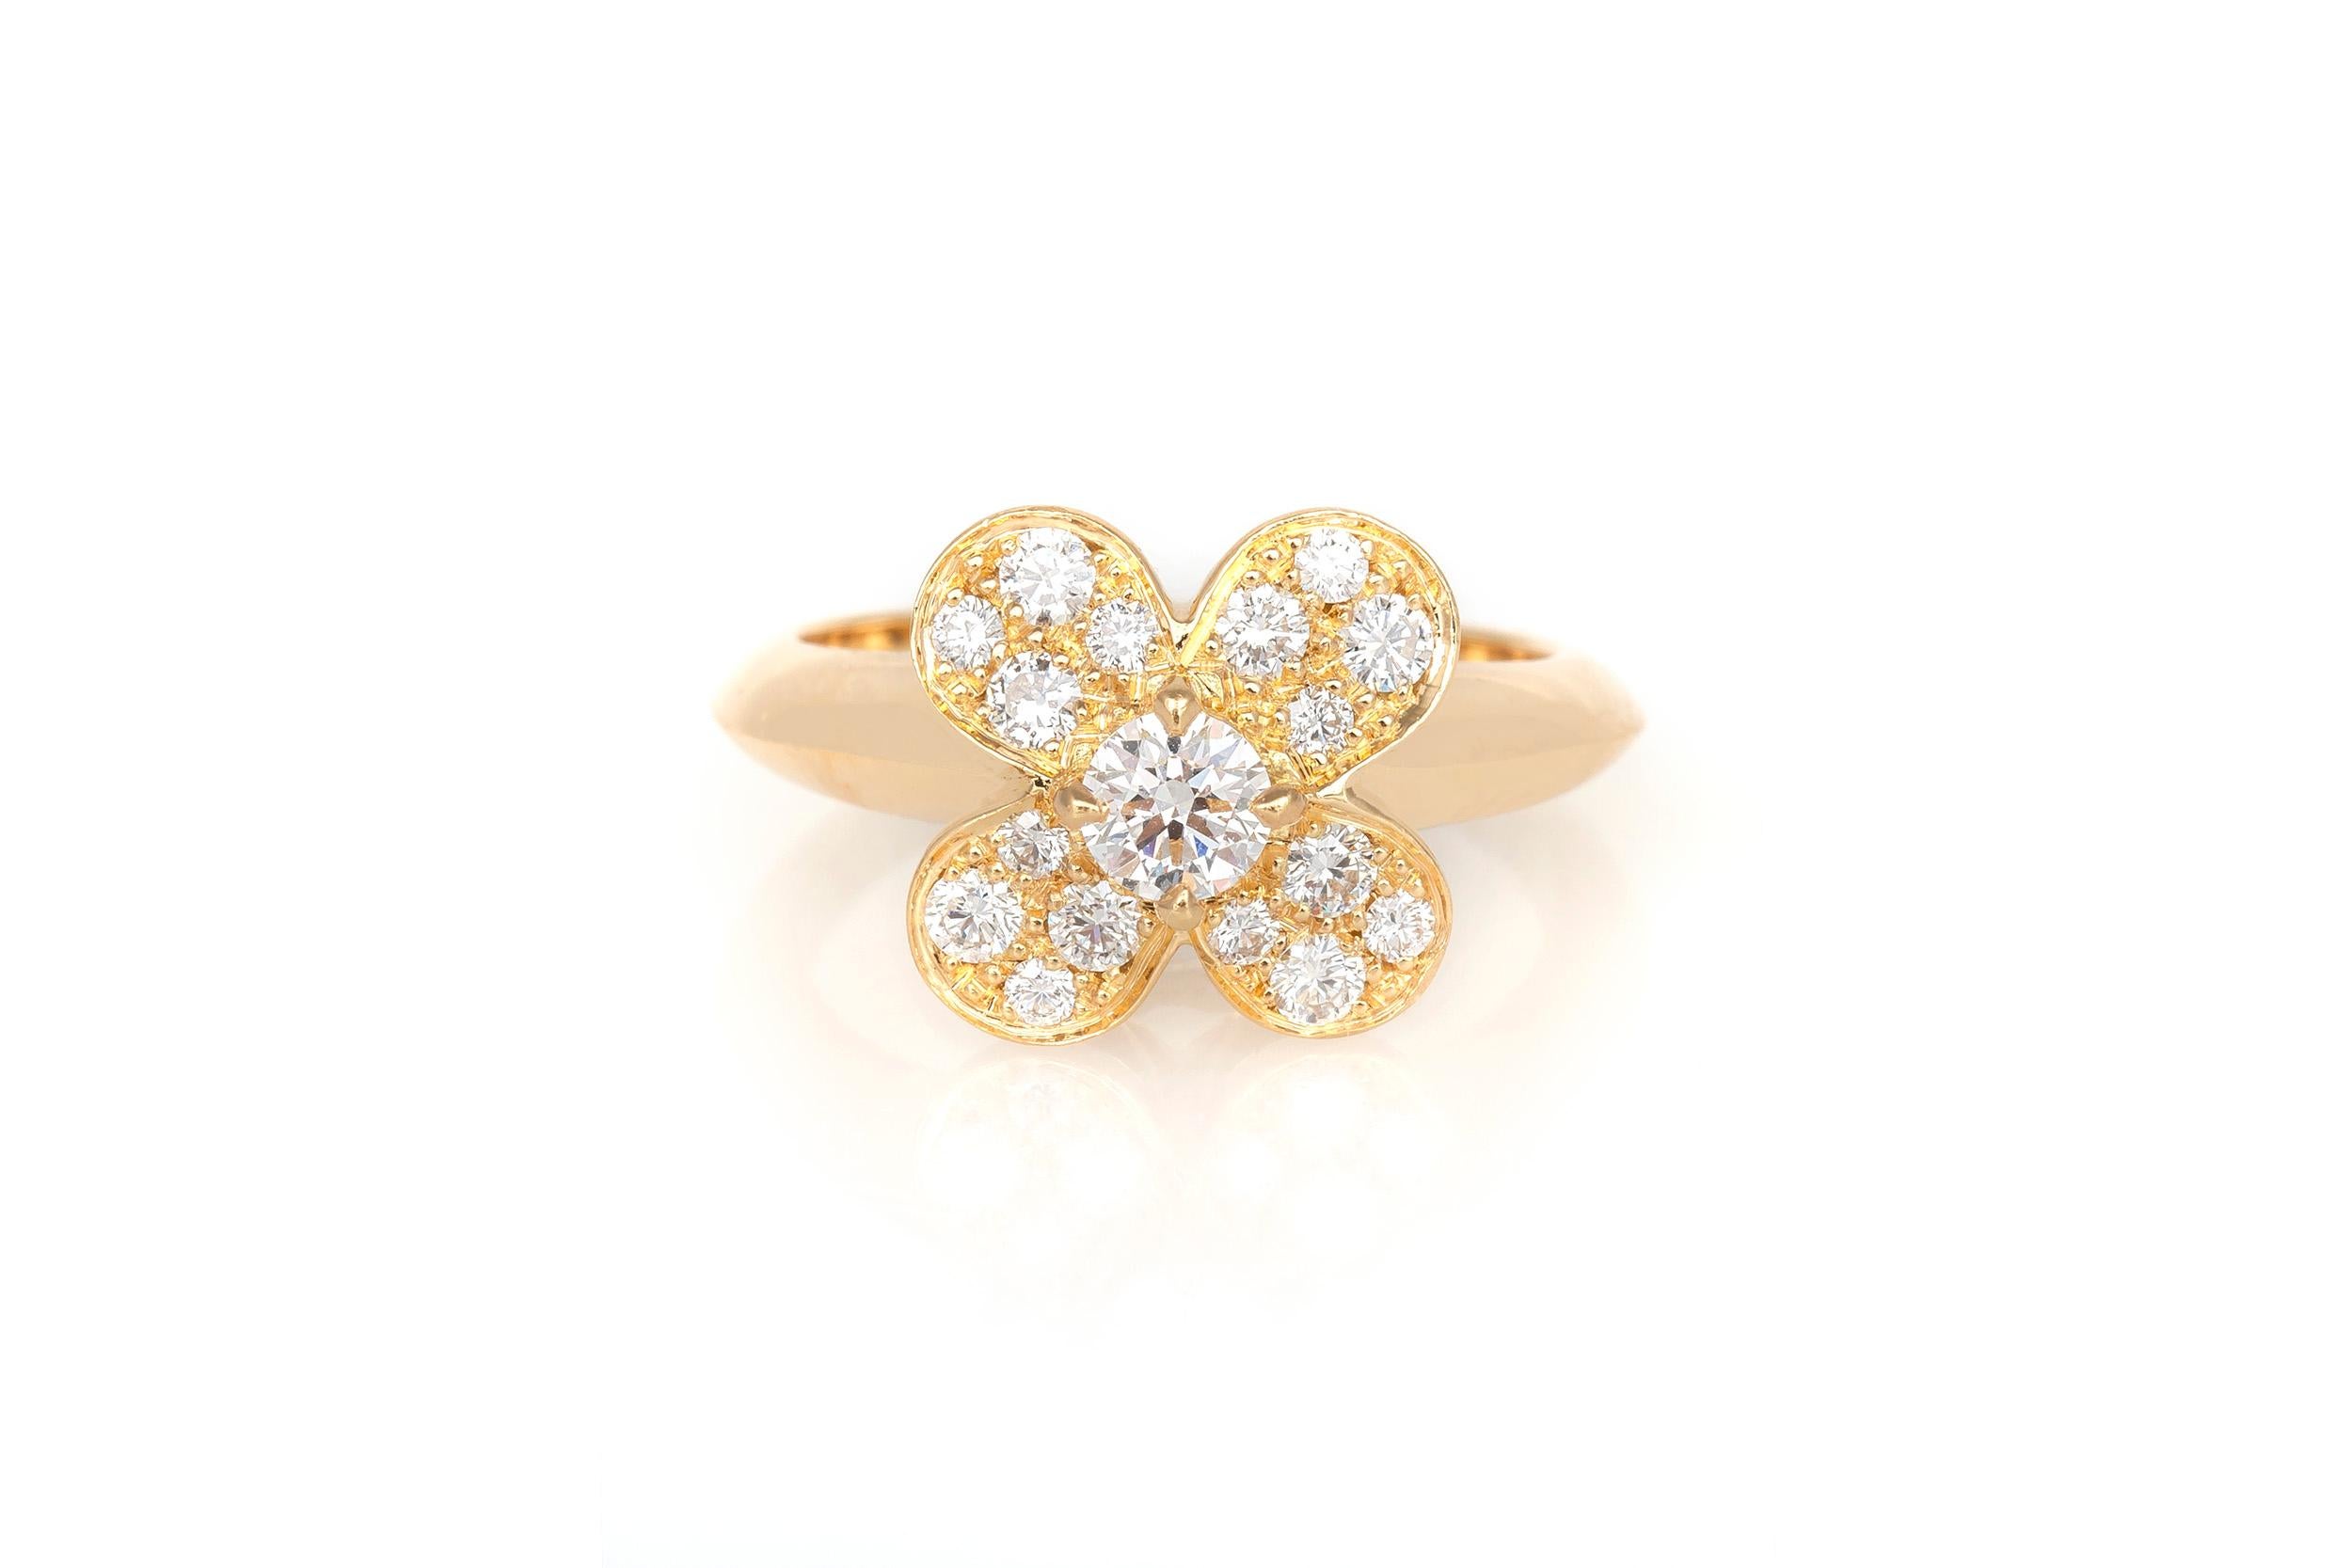 Finely crafted in 18K yellow gold with a round brilliant diamond at the center of the flower, and 4 small brilliant round diamonds on each petal.
Signed by Van Cleef & Arpels
Size 5 1/2, resizable